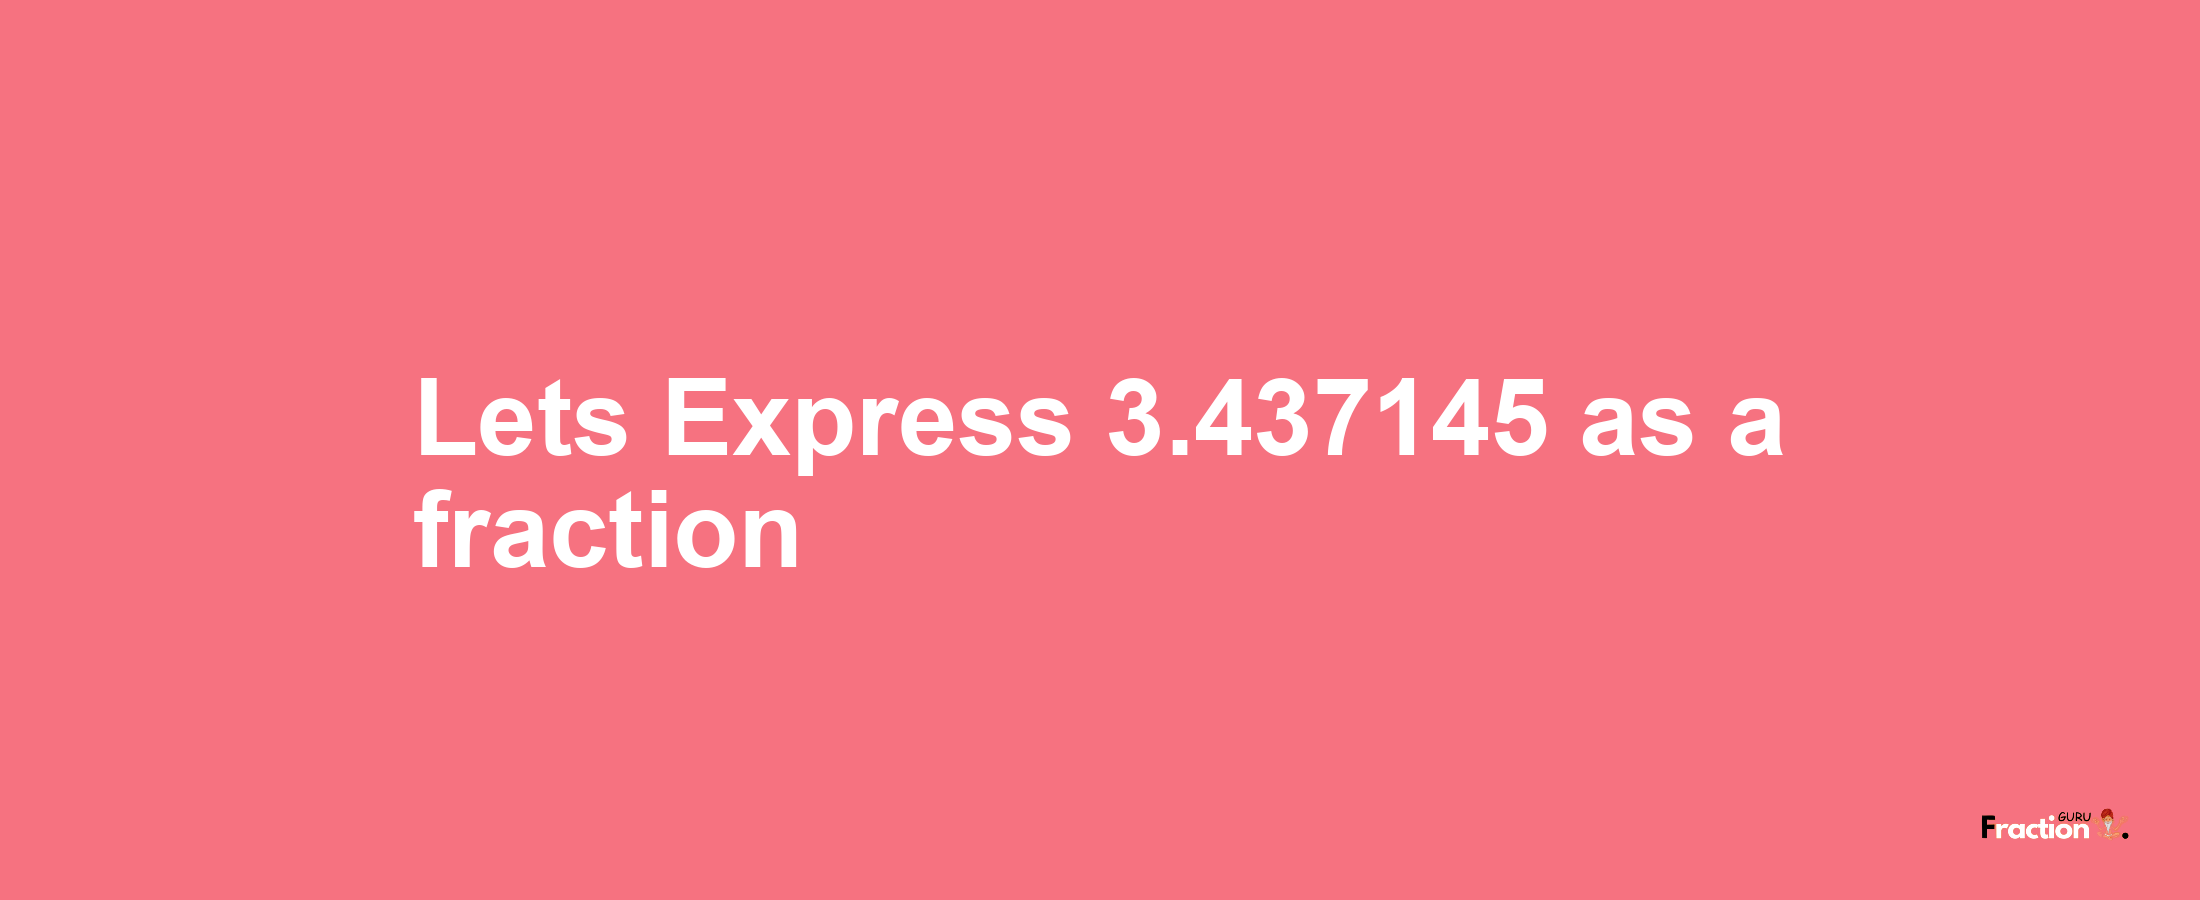 Lets Express 3.437145 as afraction